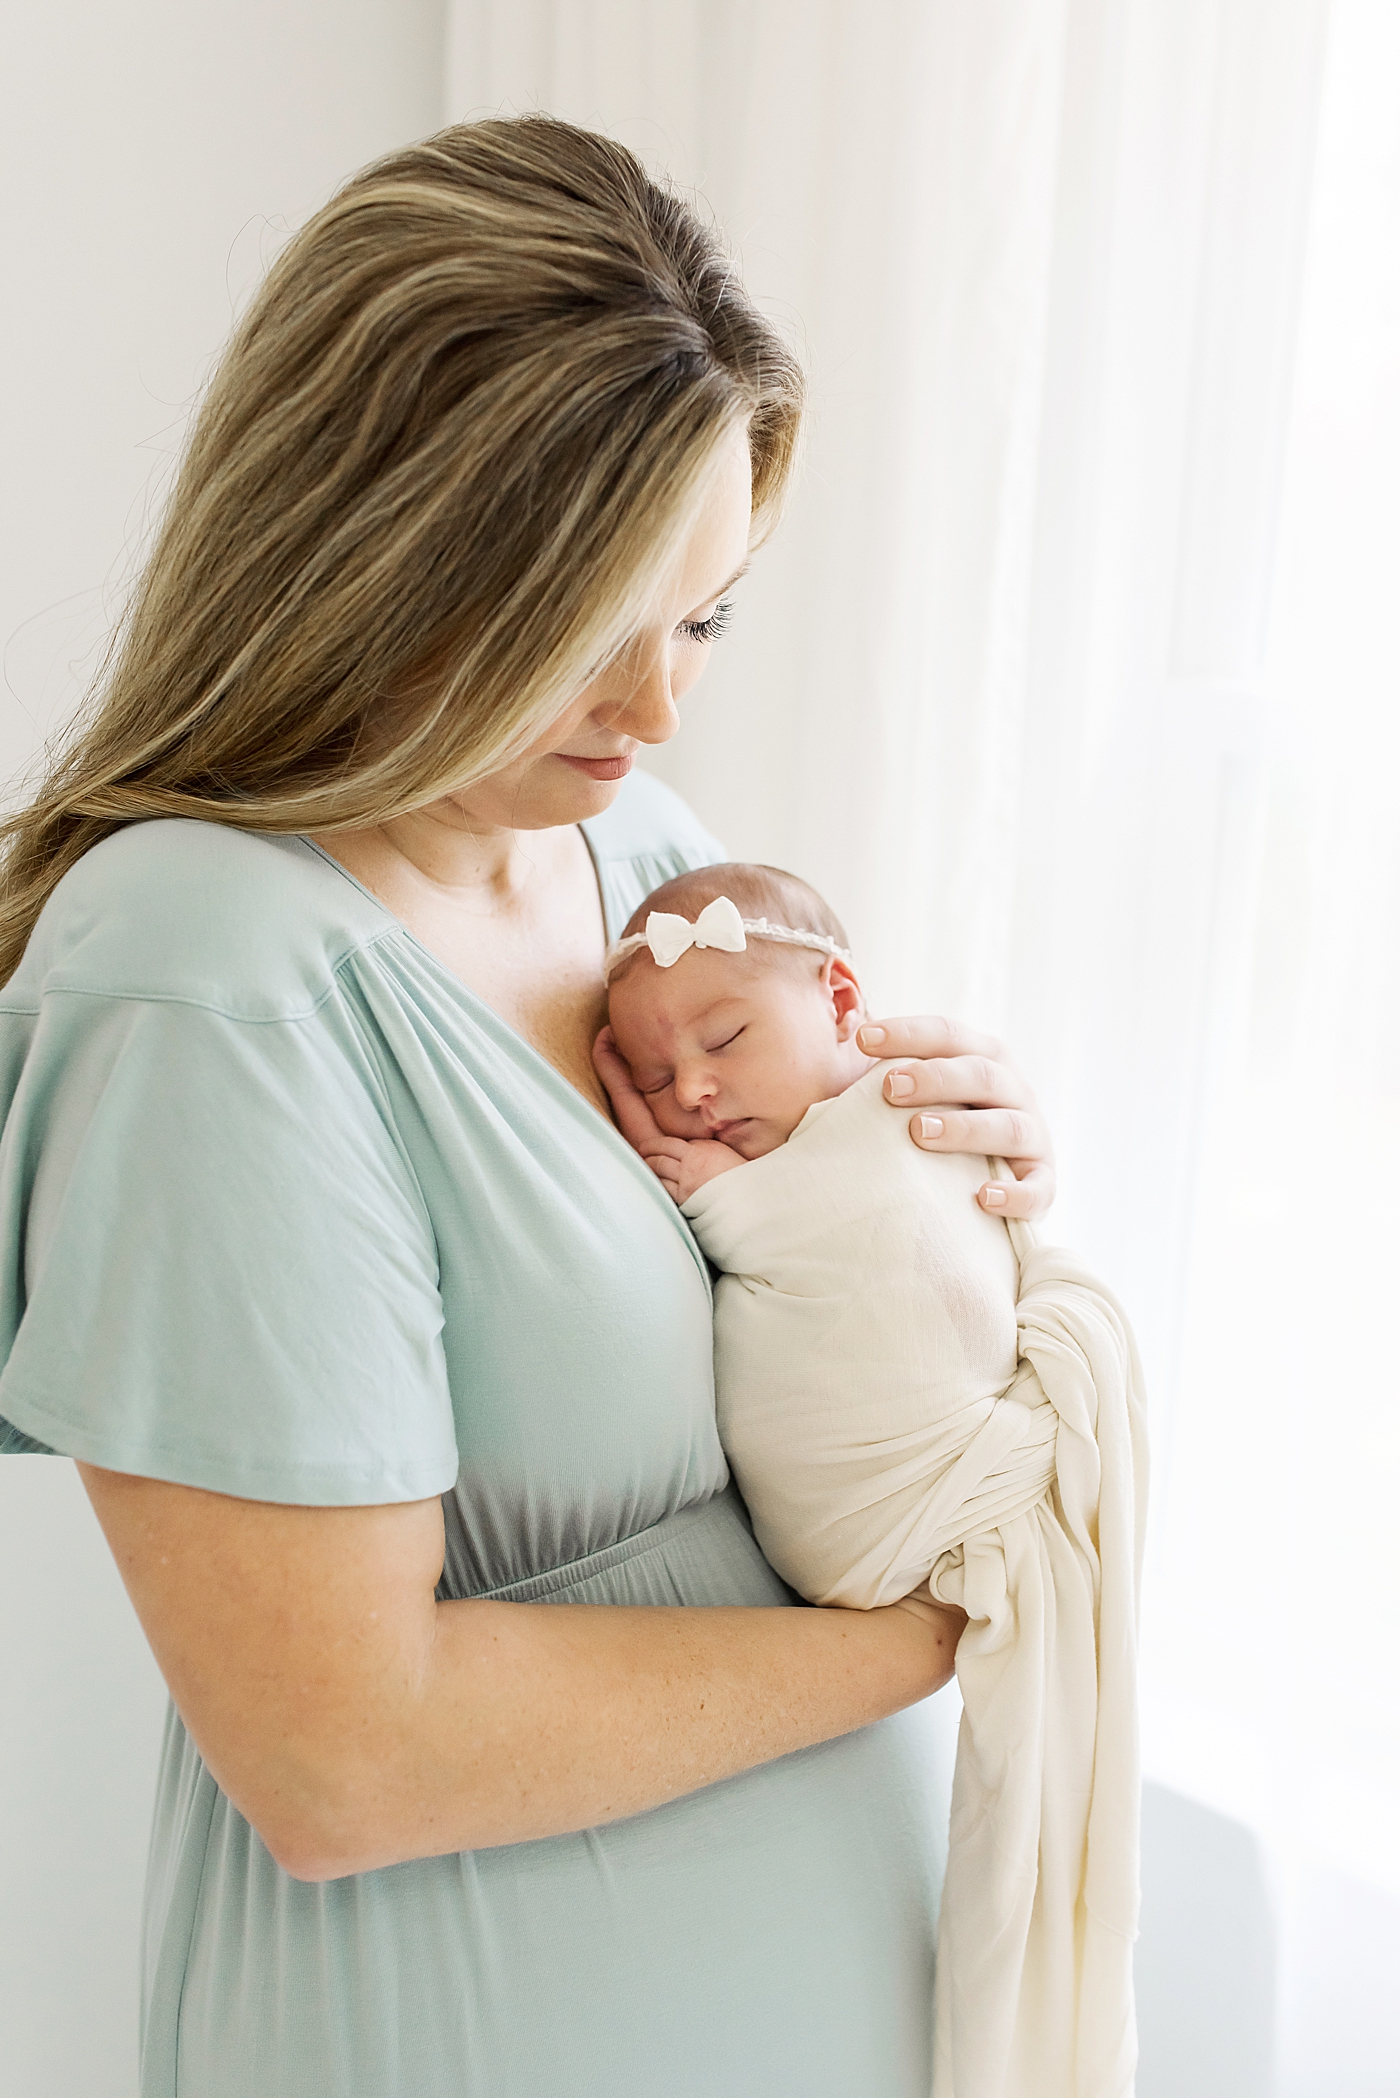 Mom in a light blue dress holding her sleeping baby girl | Photo by Anna Wisjo Photography 